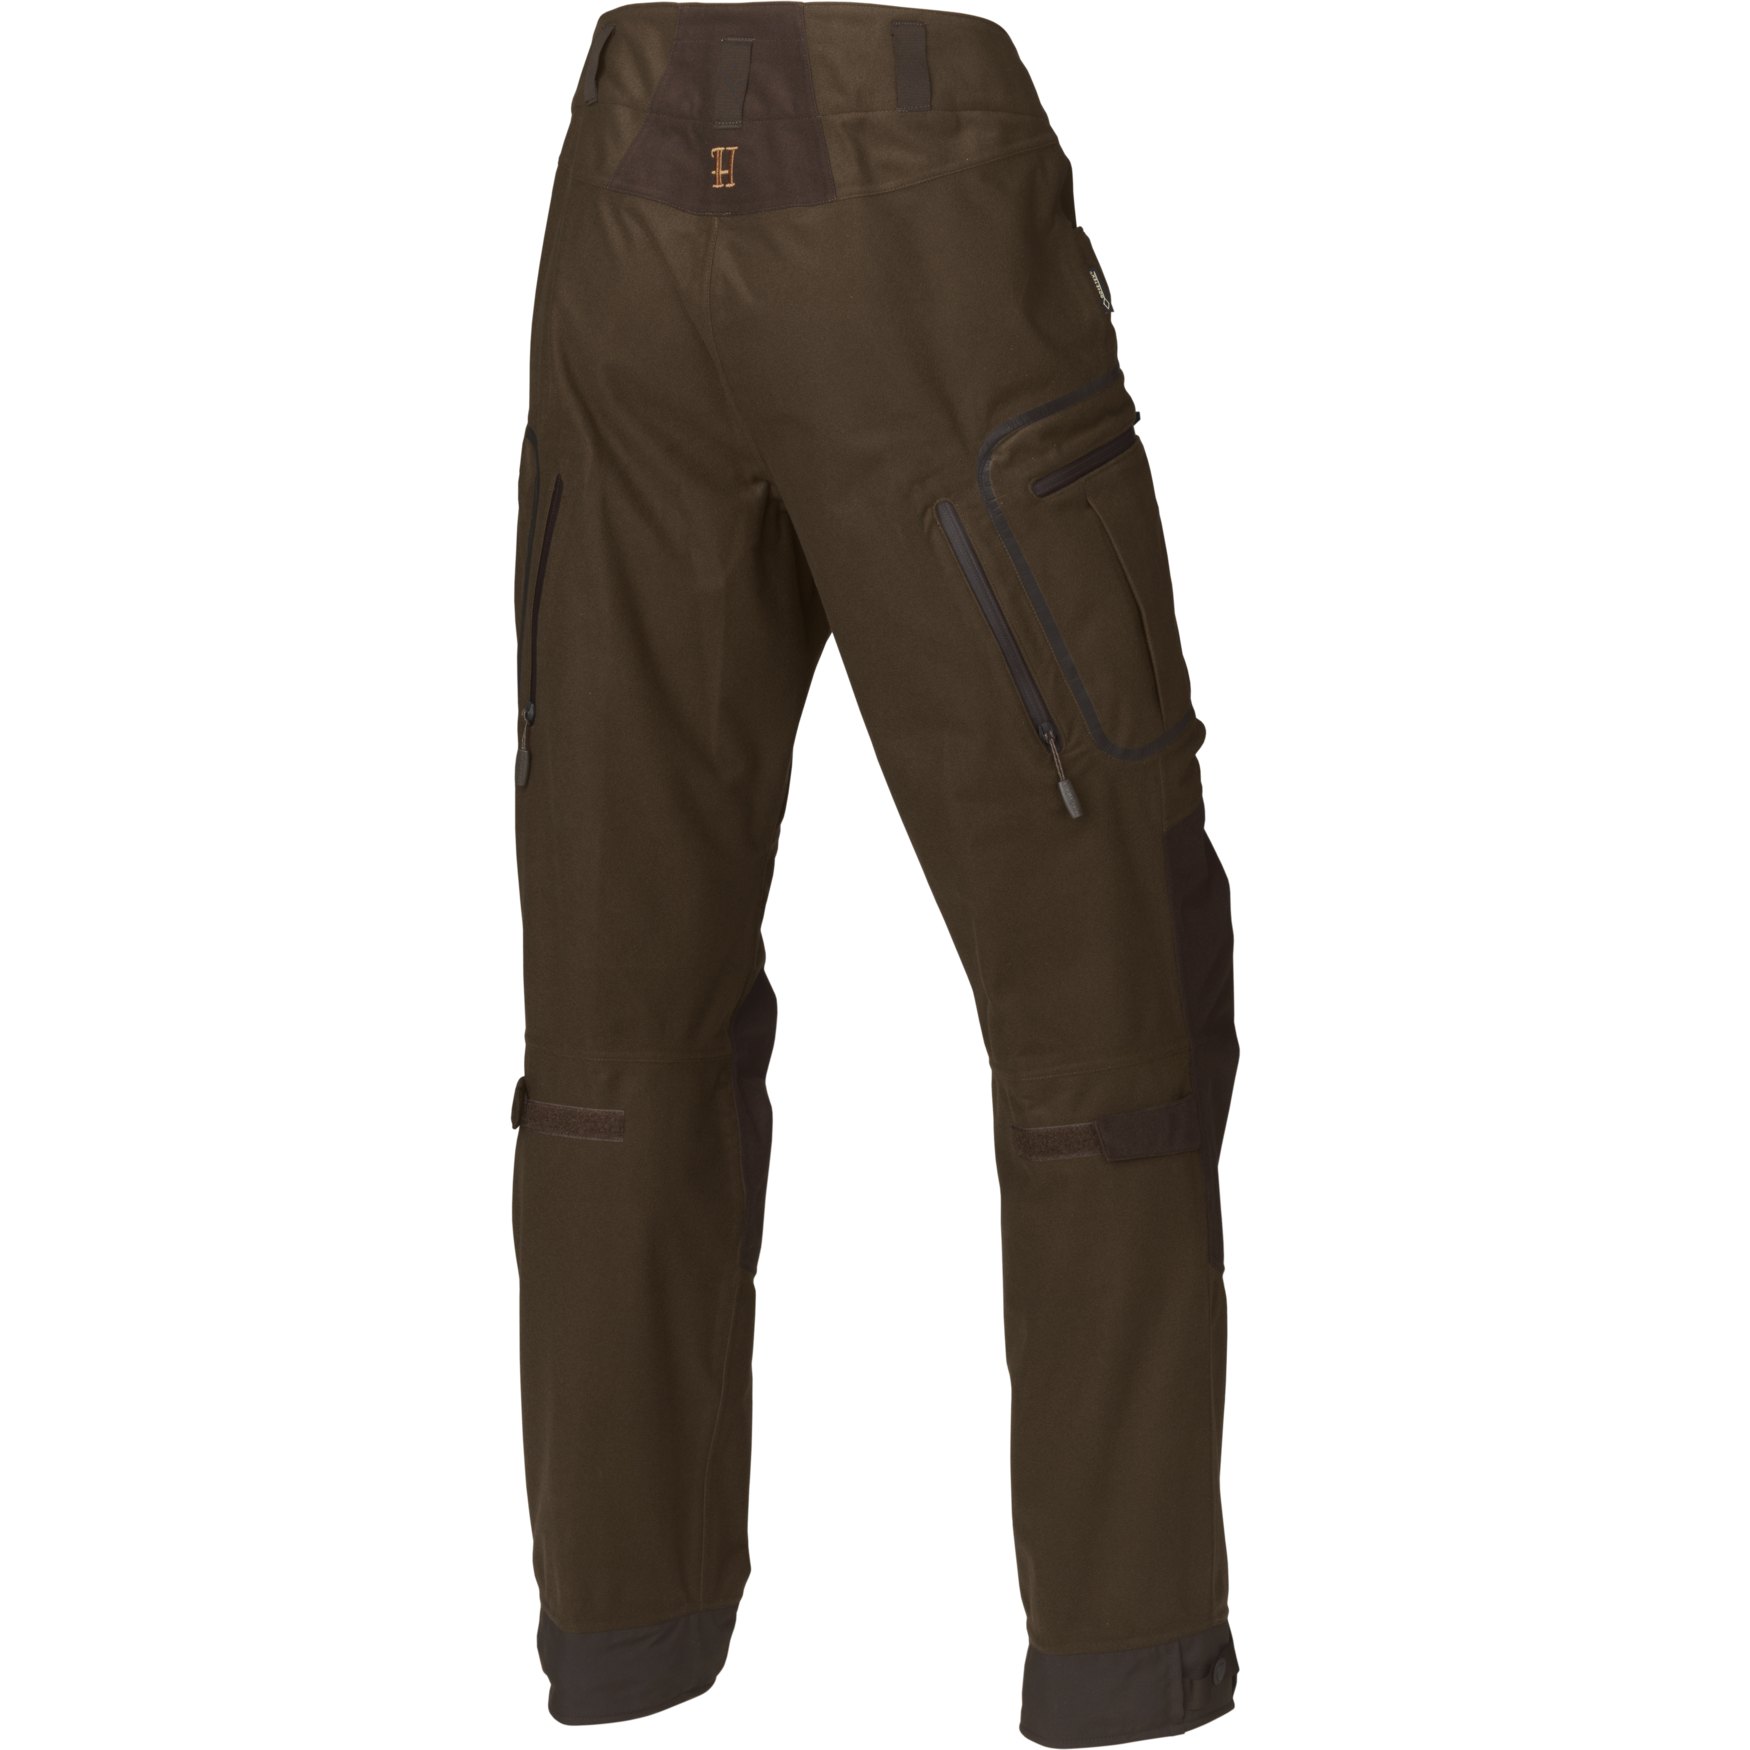 Men's Grey-Green Relaxed Fit Stretch Pant